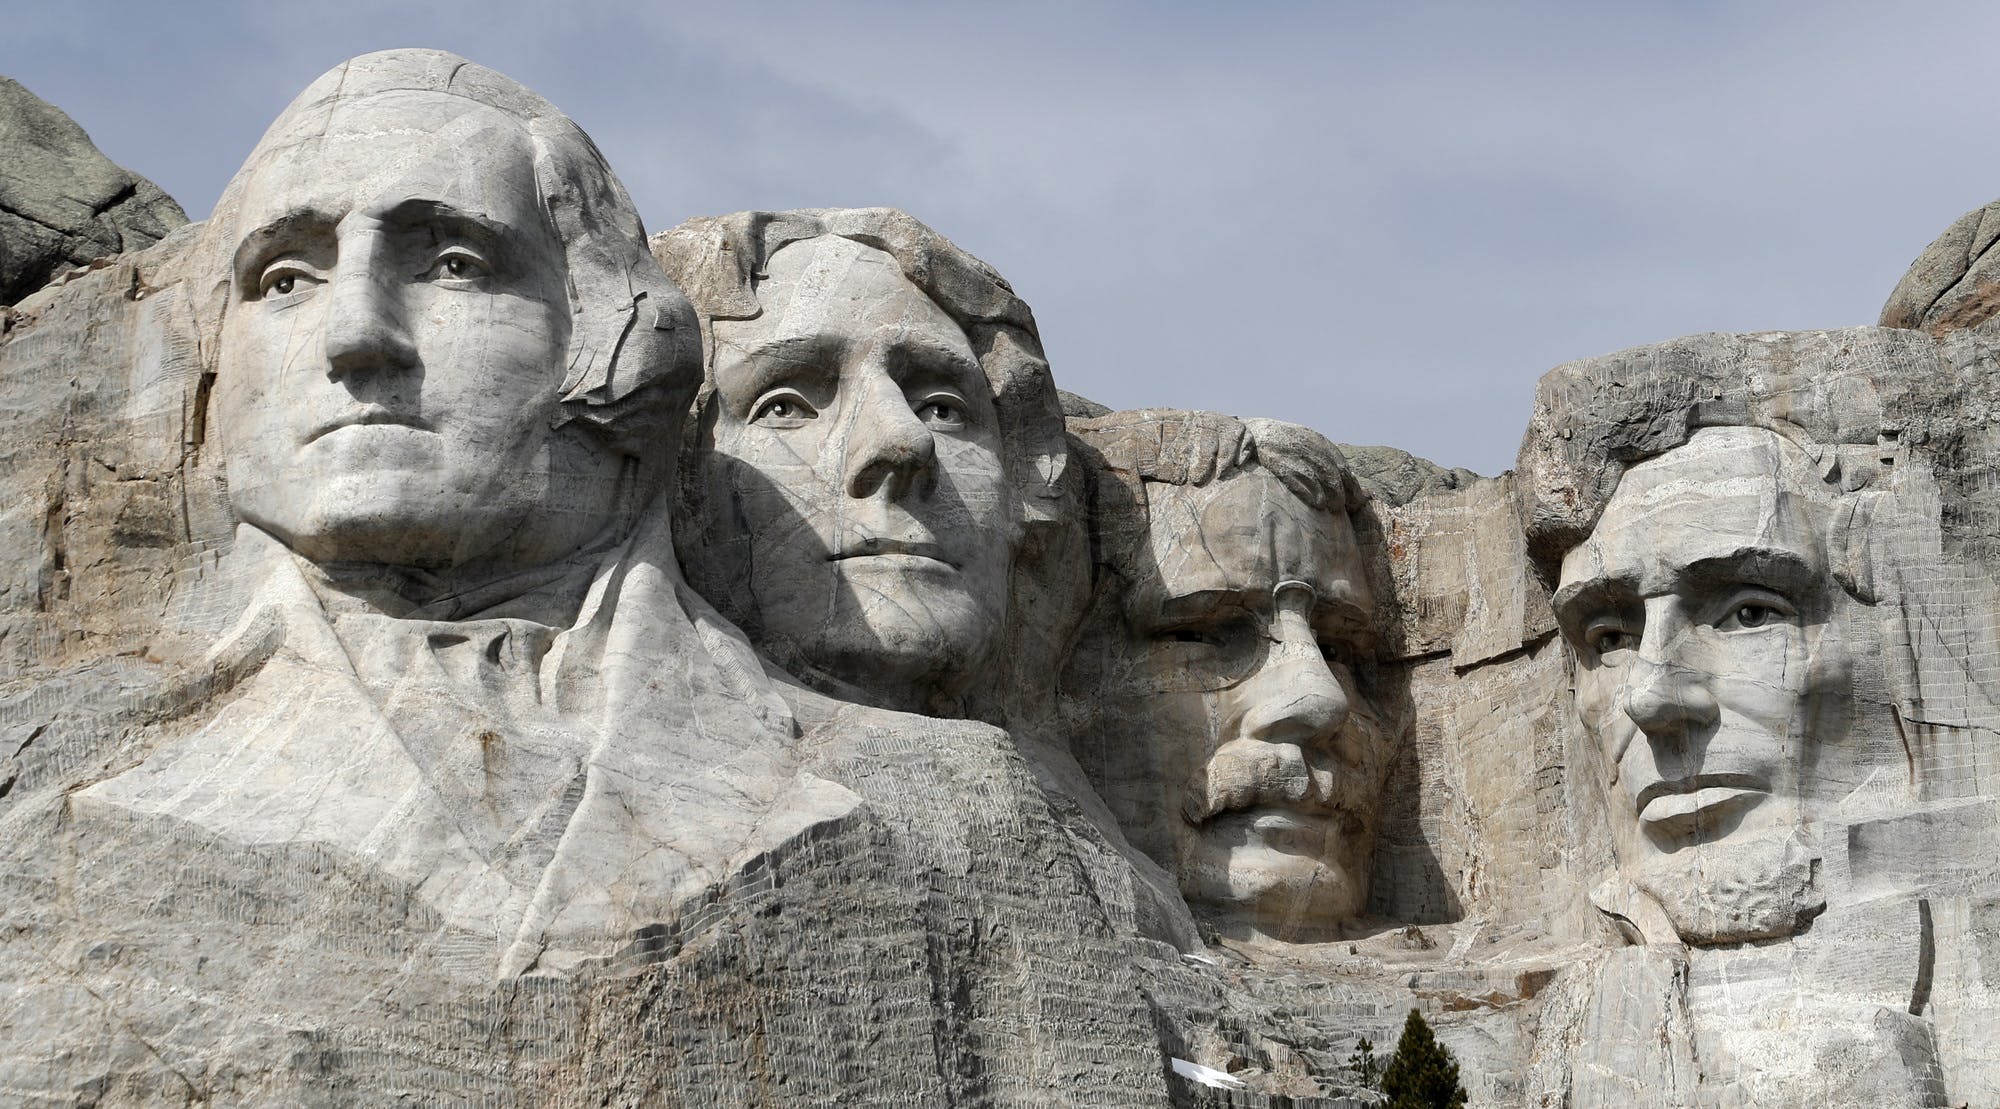 Official Democrat Party Twitter Account Attacks Mount Rushmore, Cites “White Supremacy”